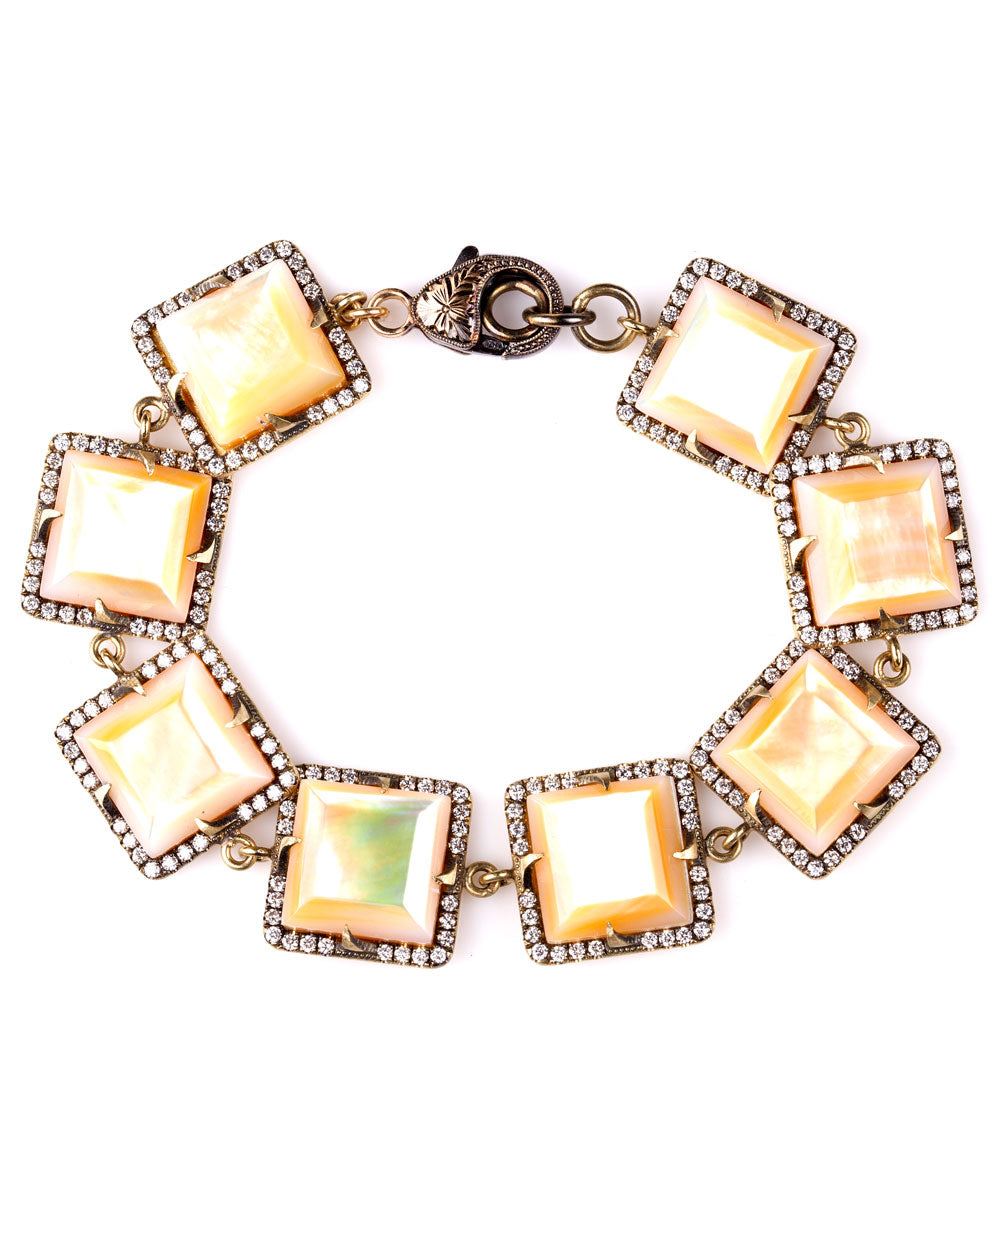 Diamond and Mother of Pearl Bracelet